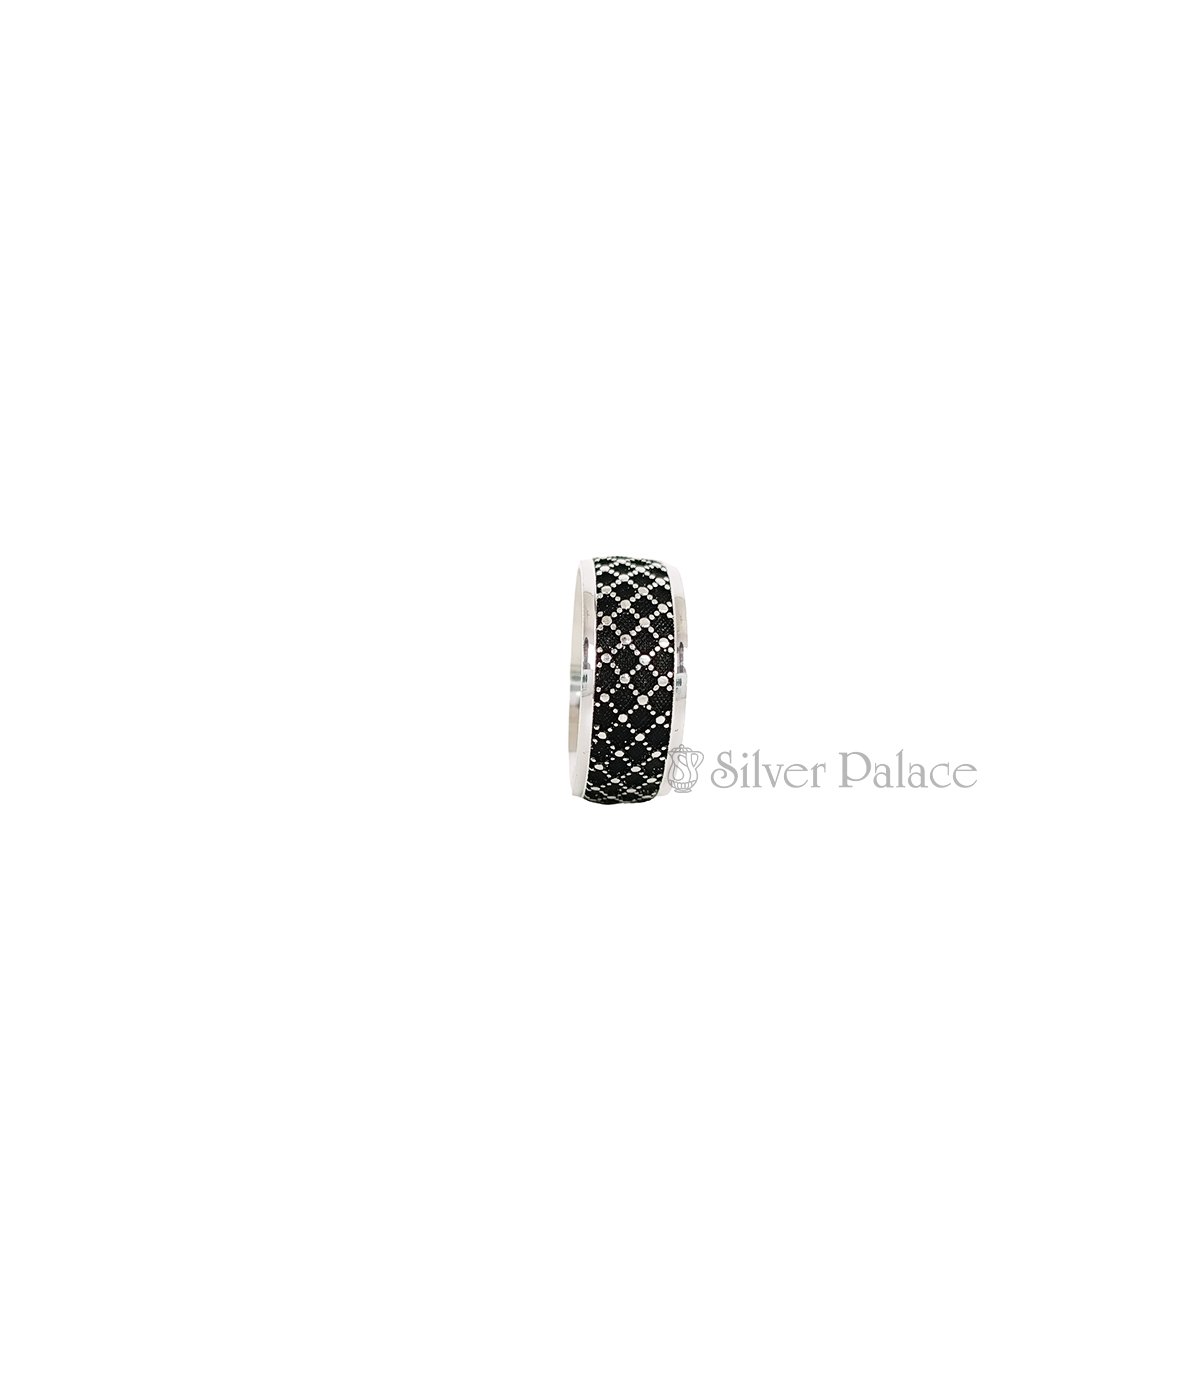 OXIDISED SILVER DOTTED PATTERN THUMB RING FOR MEN